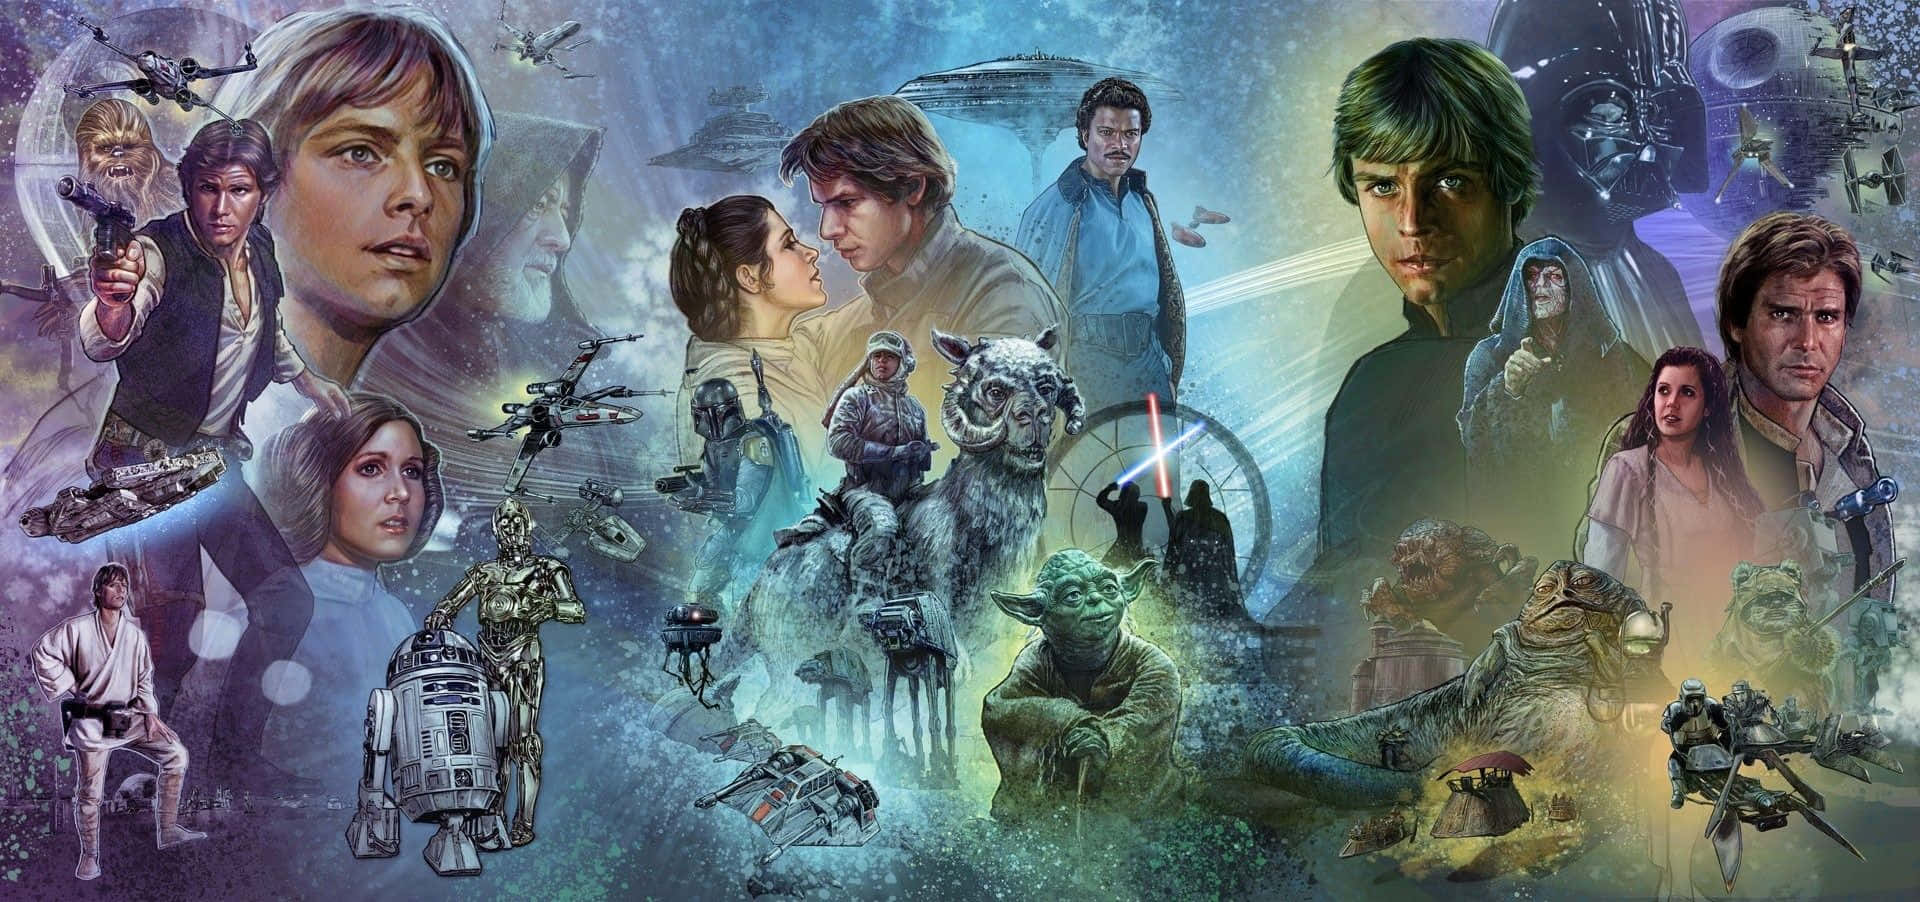 Star Wars - The Movie Poster Wallpaper